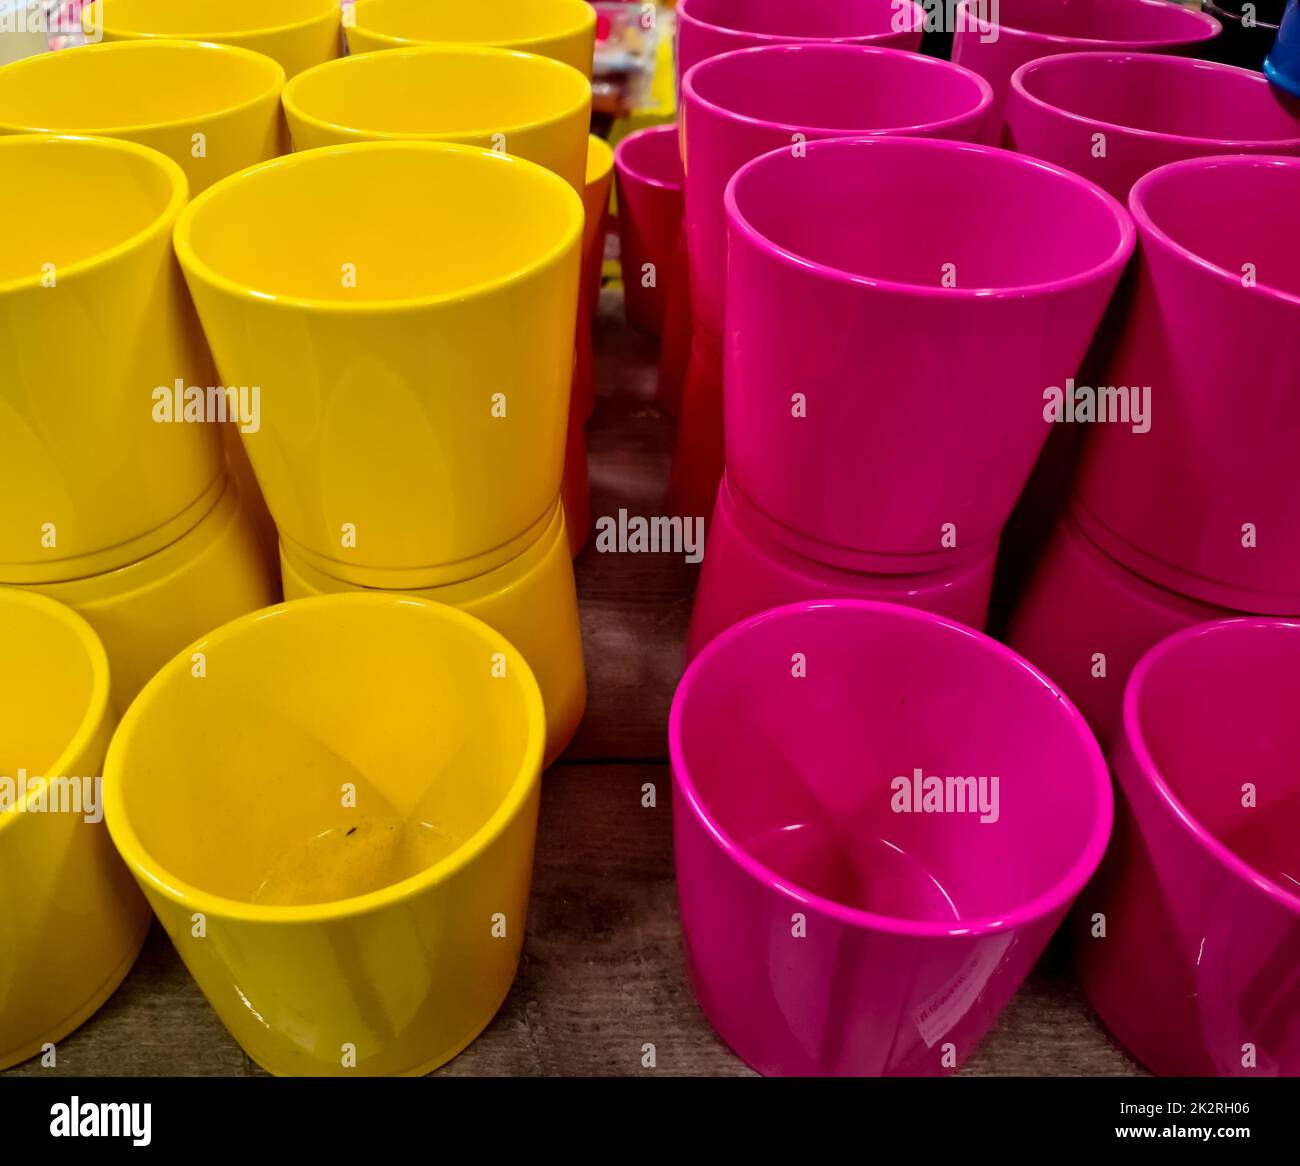 A stack of decorative yellow and pink flower pots. Stock Photo